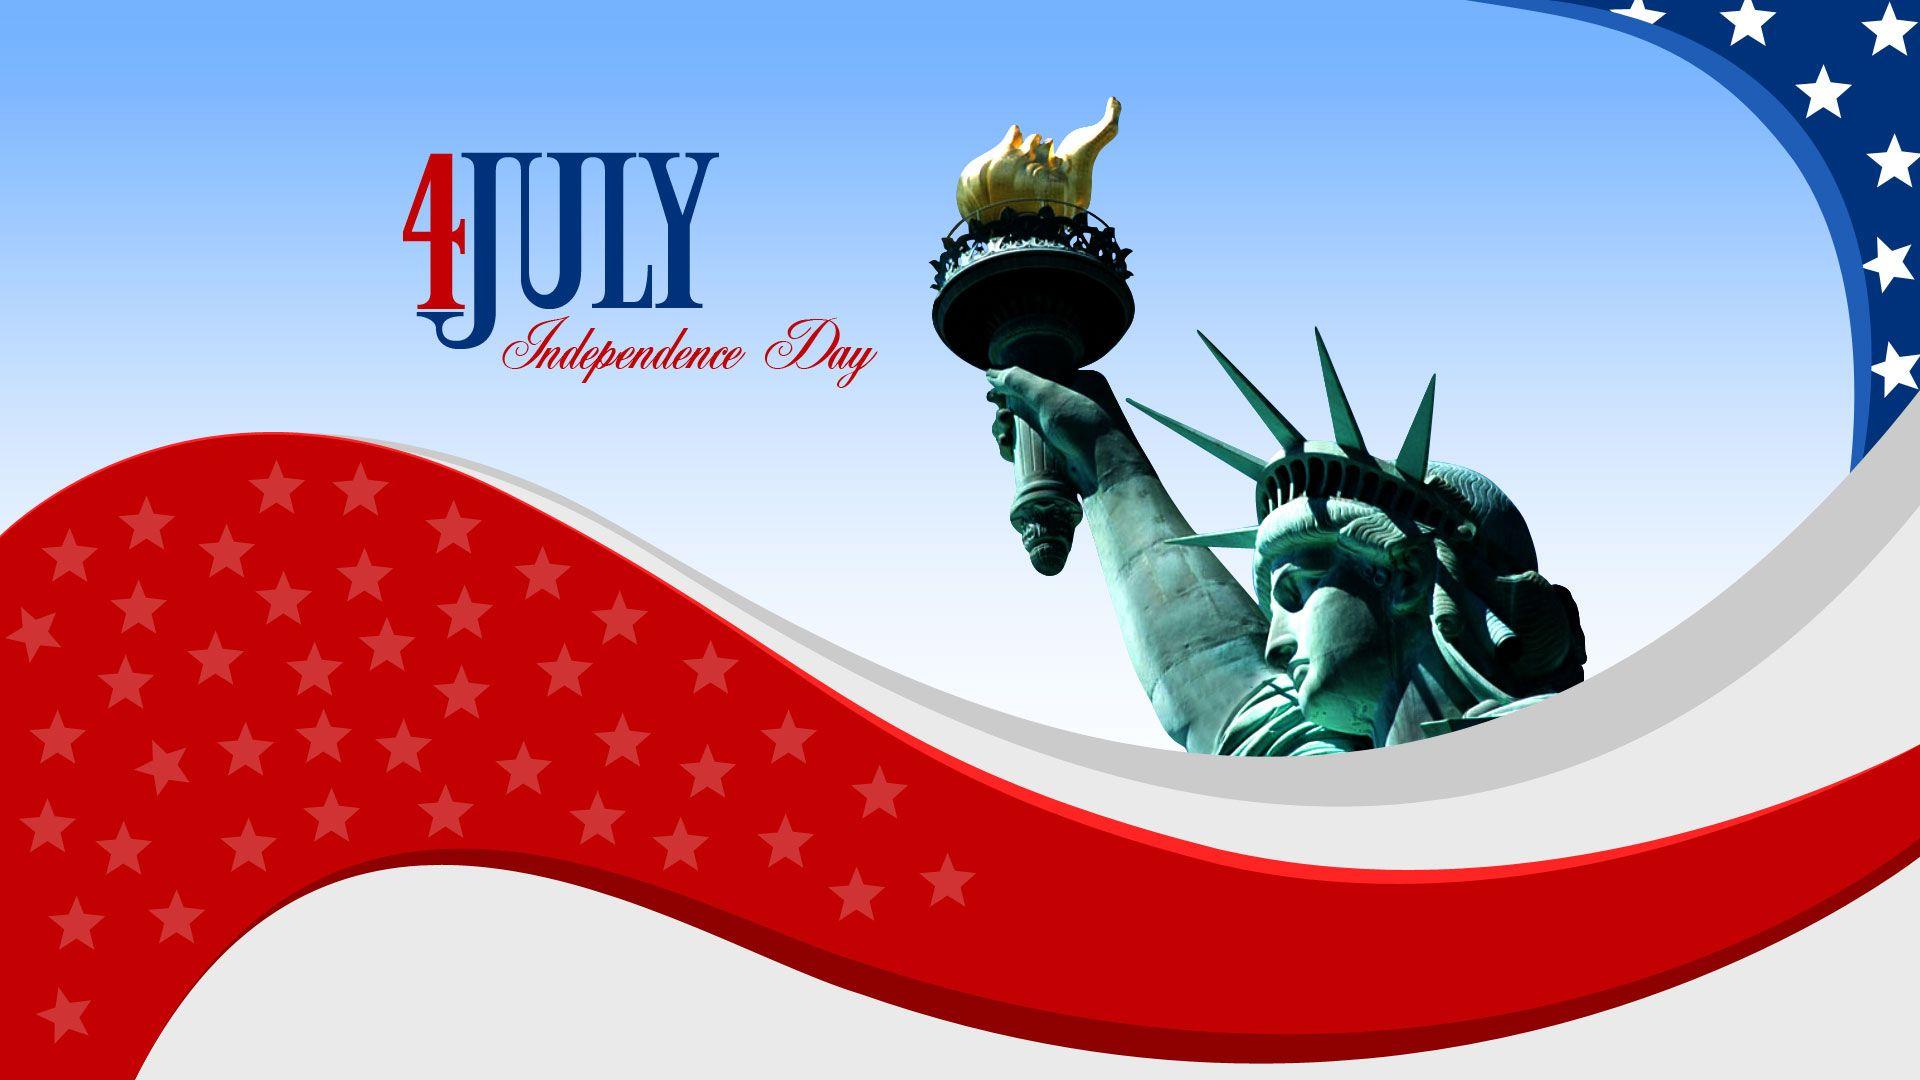 USA Happy Independence Day 2015 United states of america